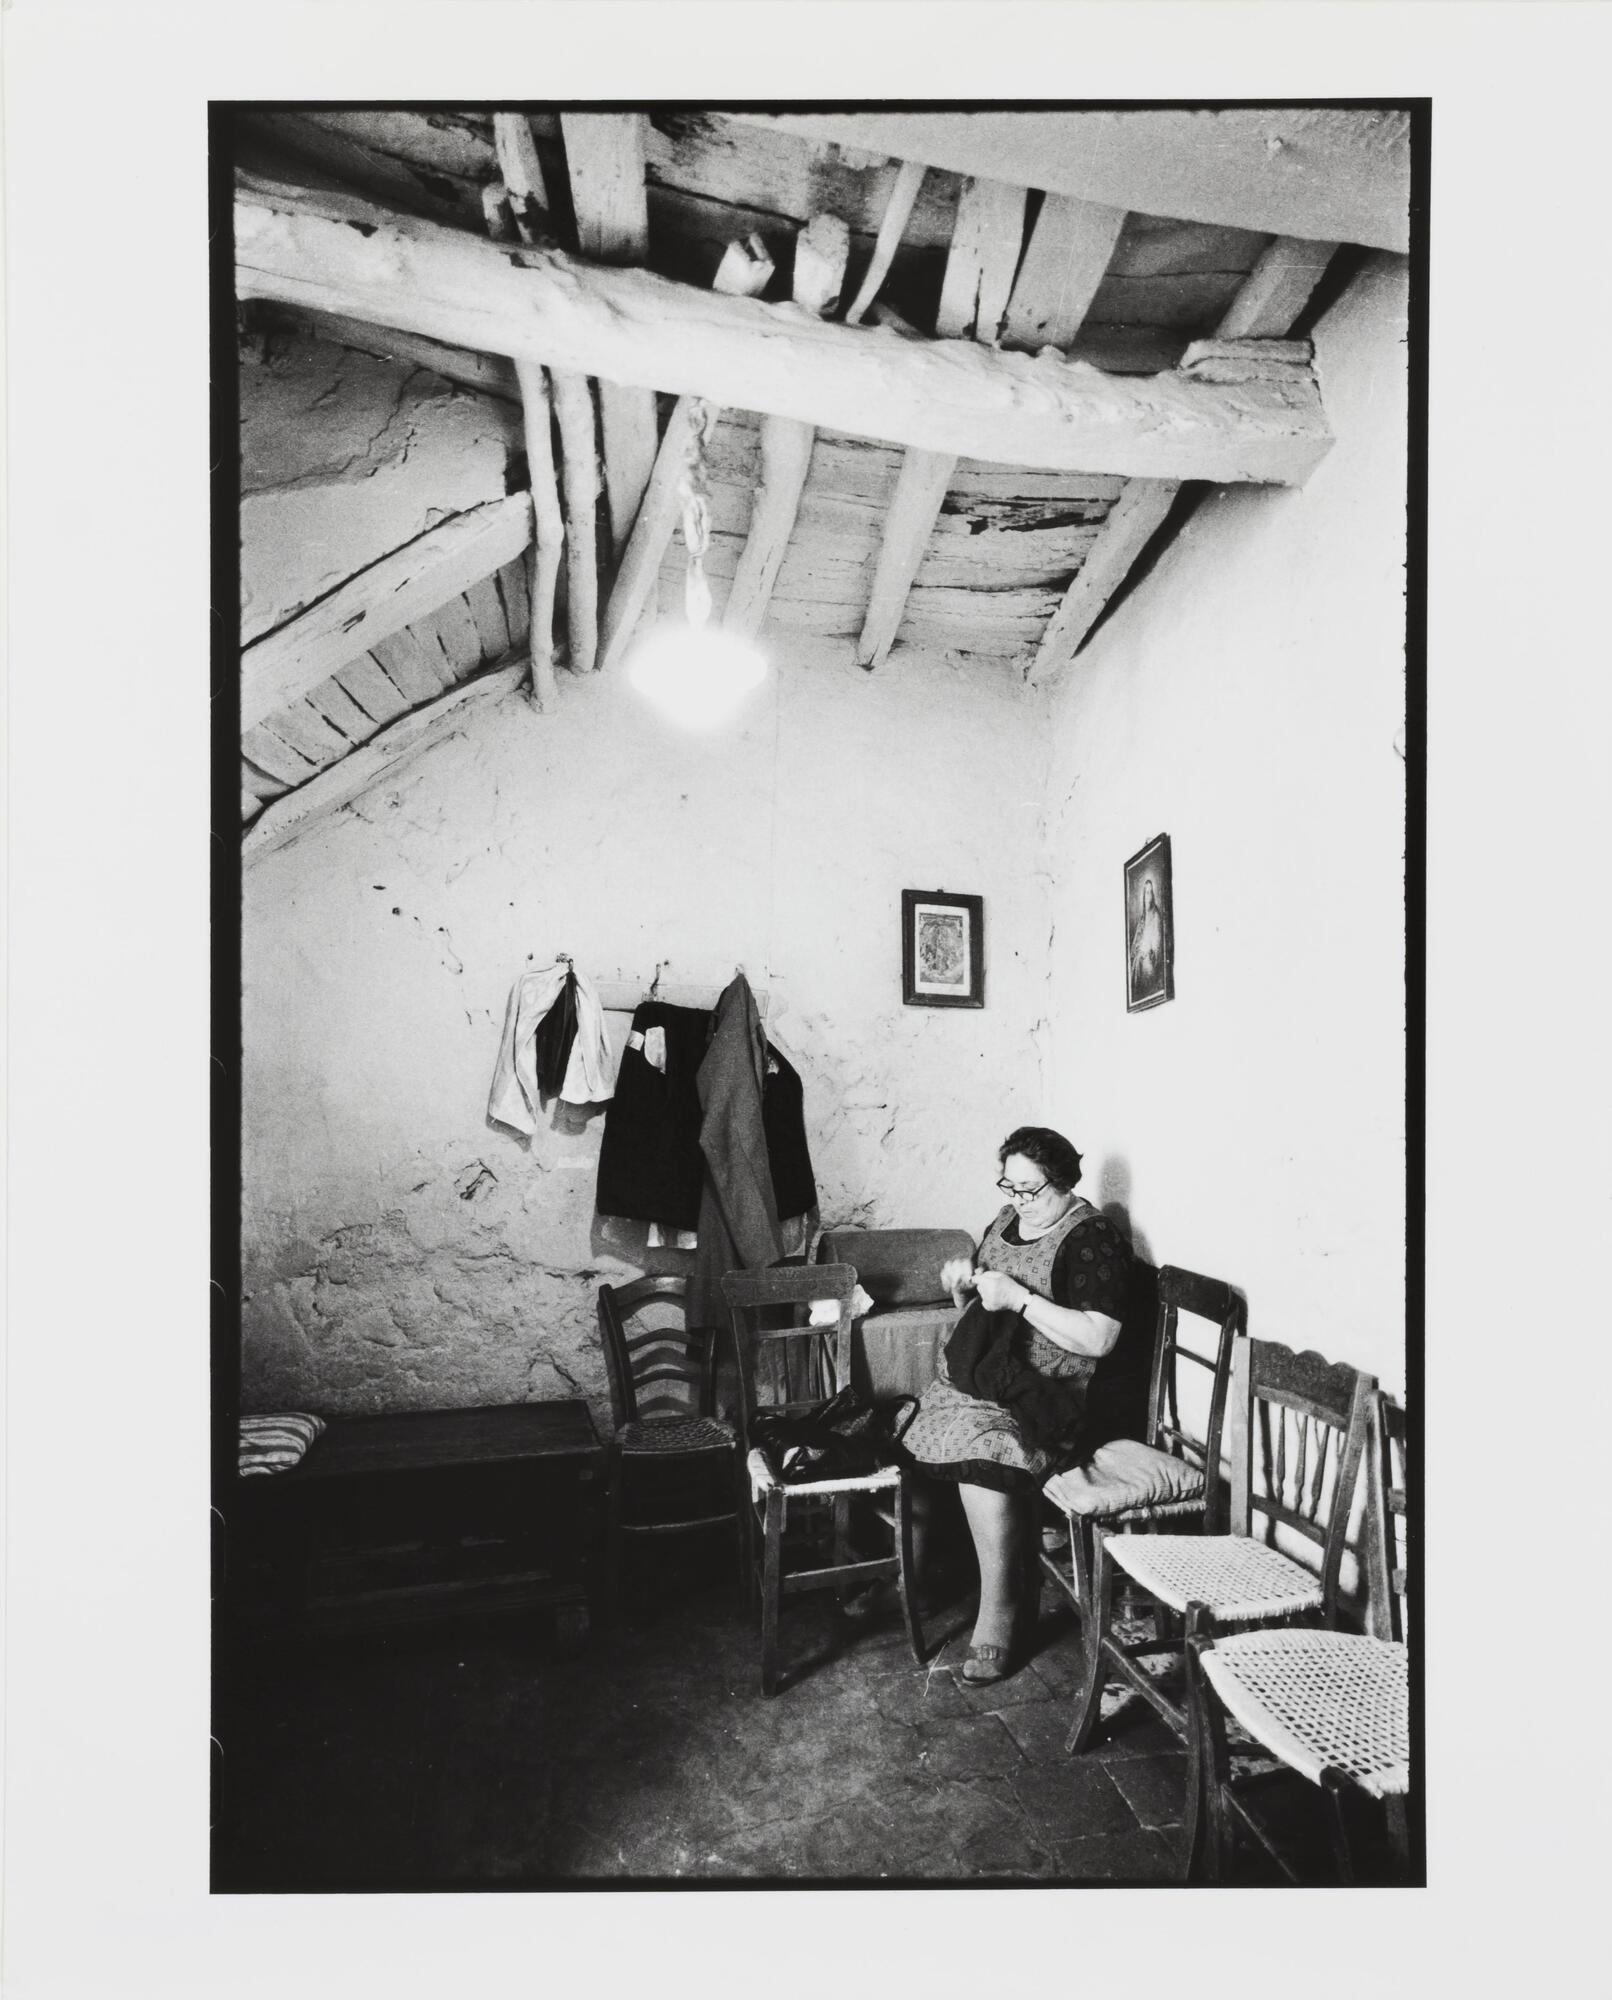 A woman sits in the corner of a room with white-washed walls and ceiling rafters. Chairs line the wall to her left.